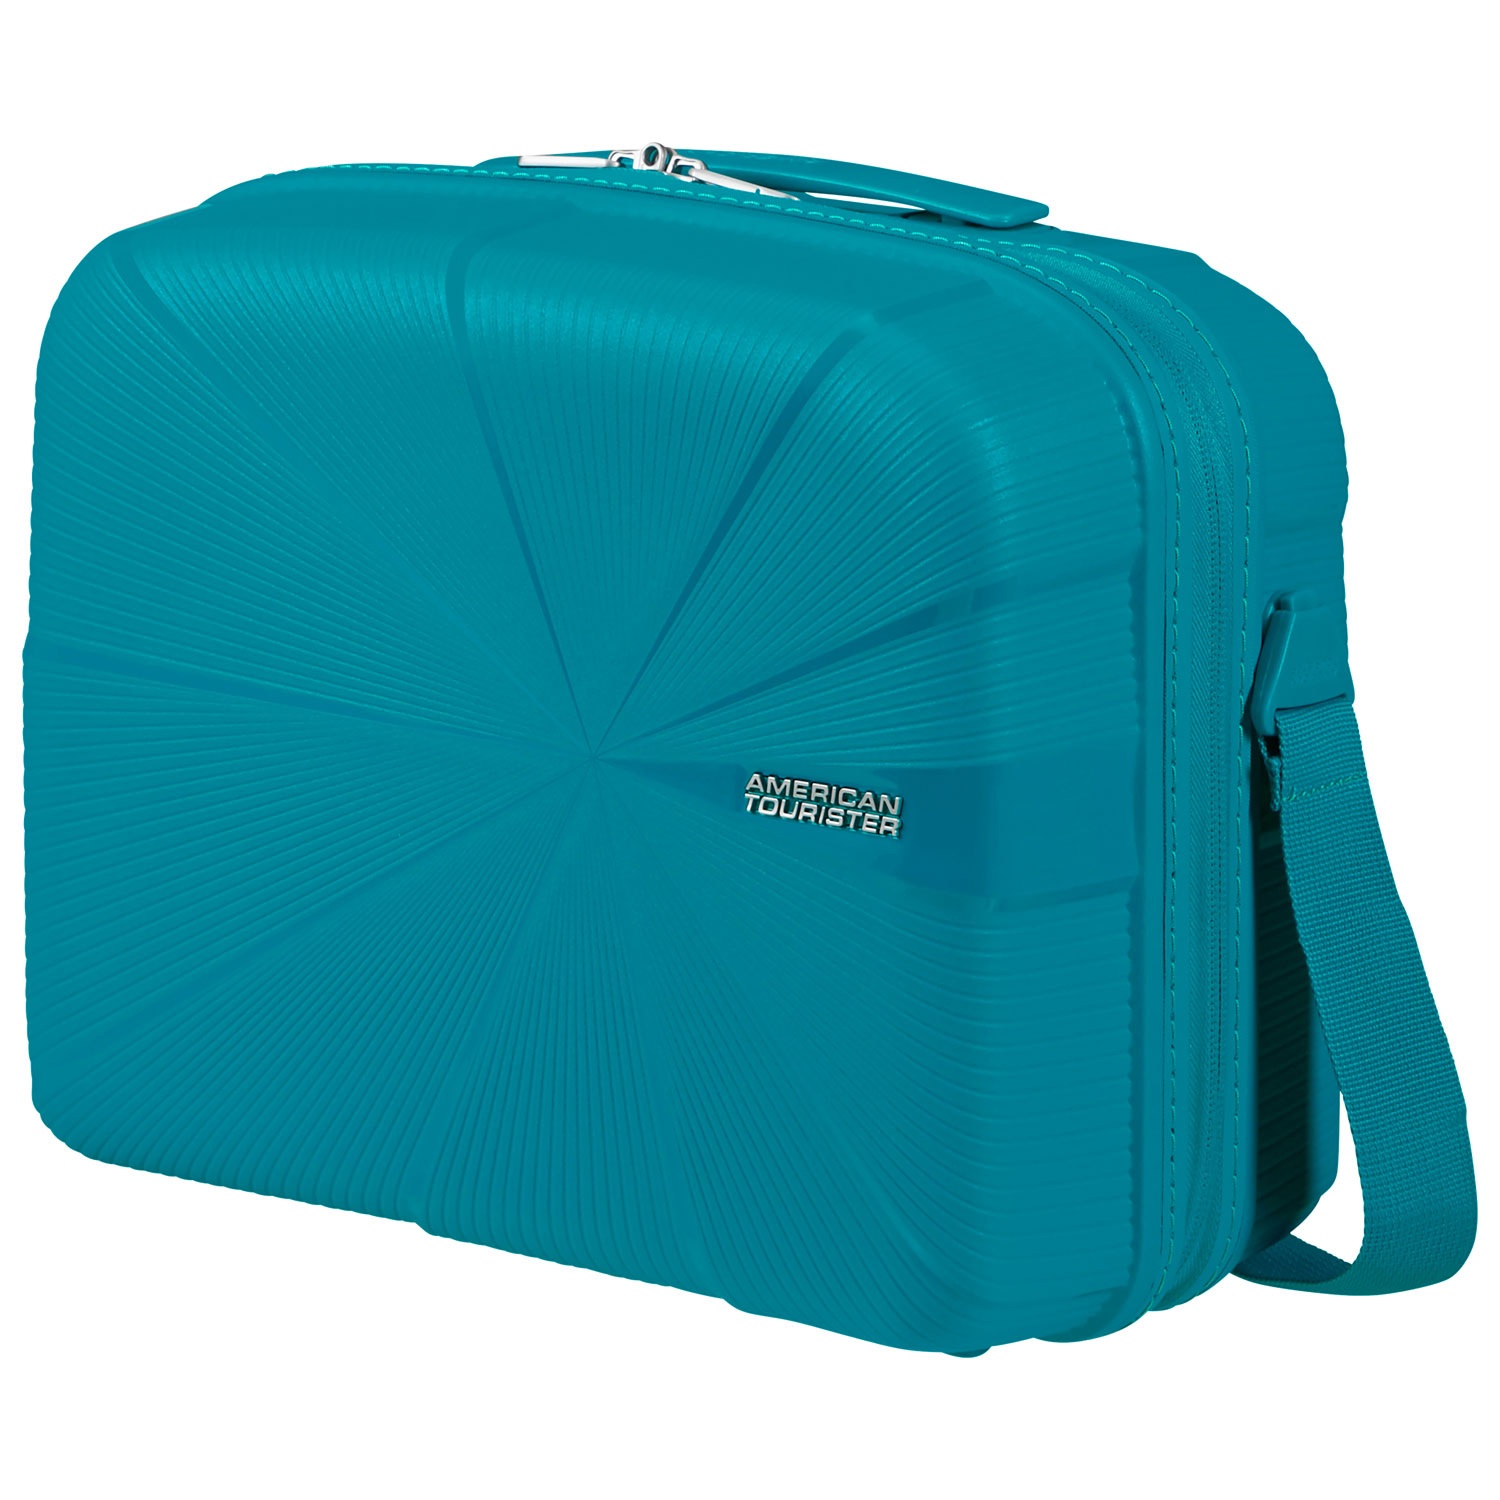 American Tourister Starvibe 3-Piece Hard Side Expandable Luggage Set - Verdigris